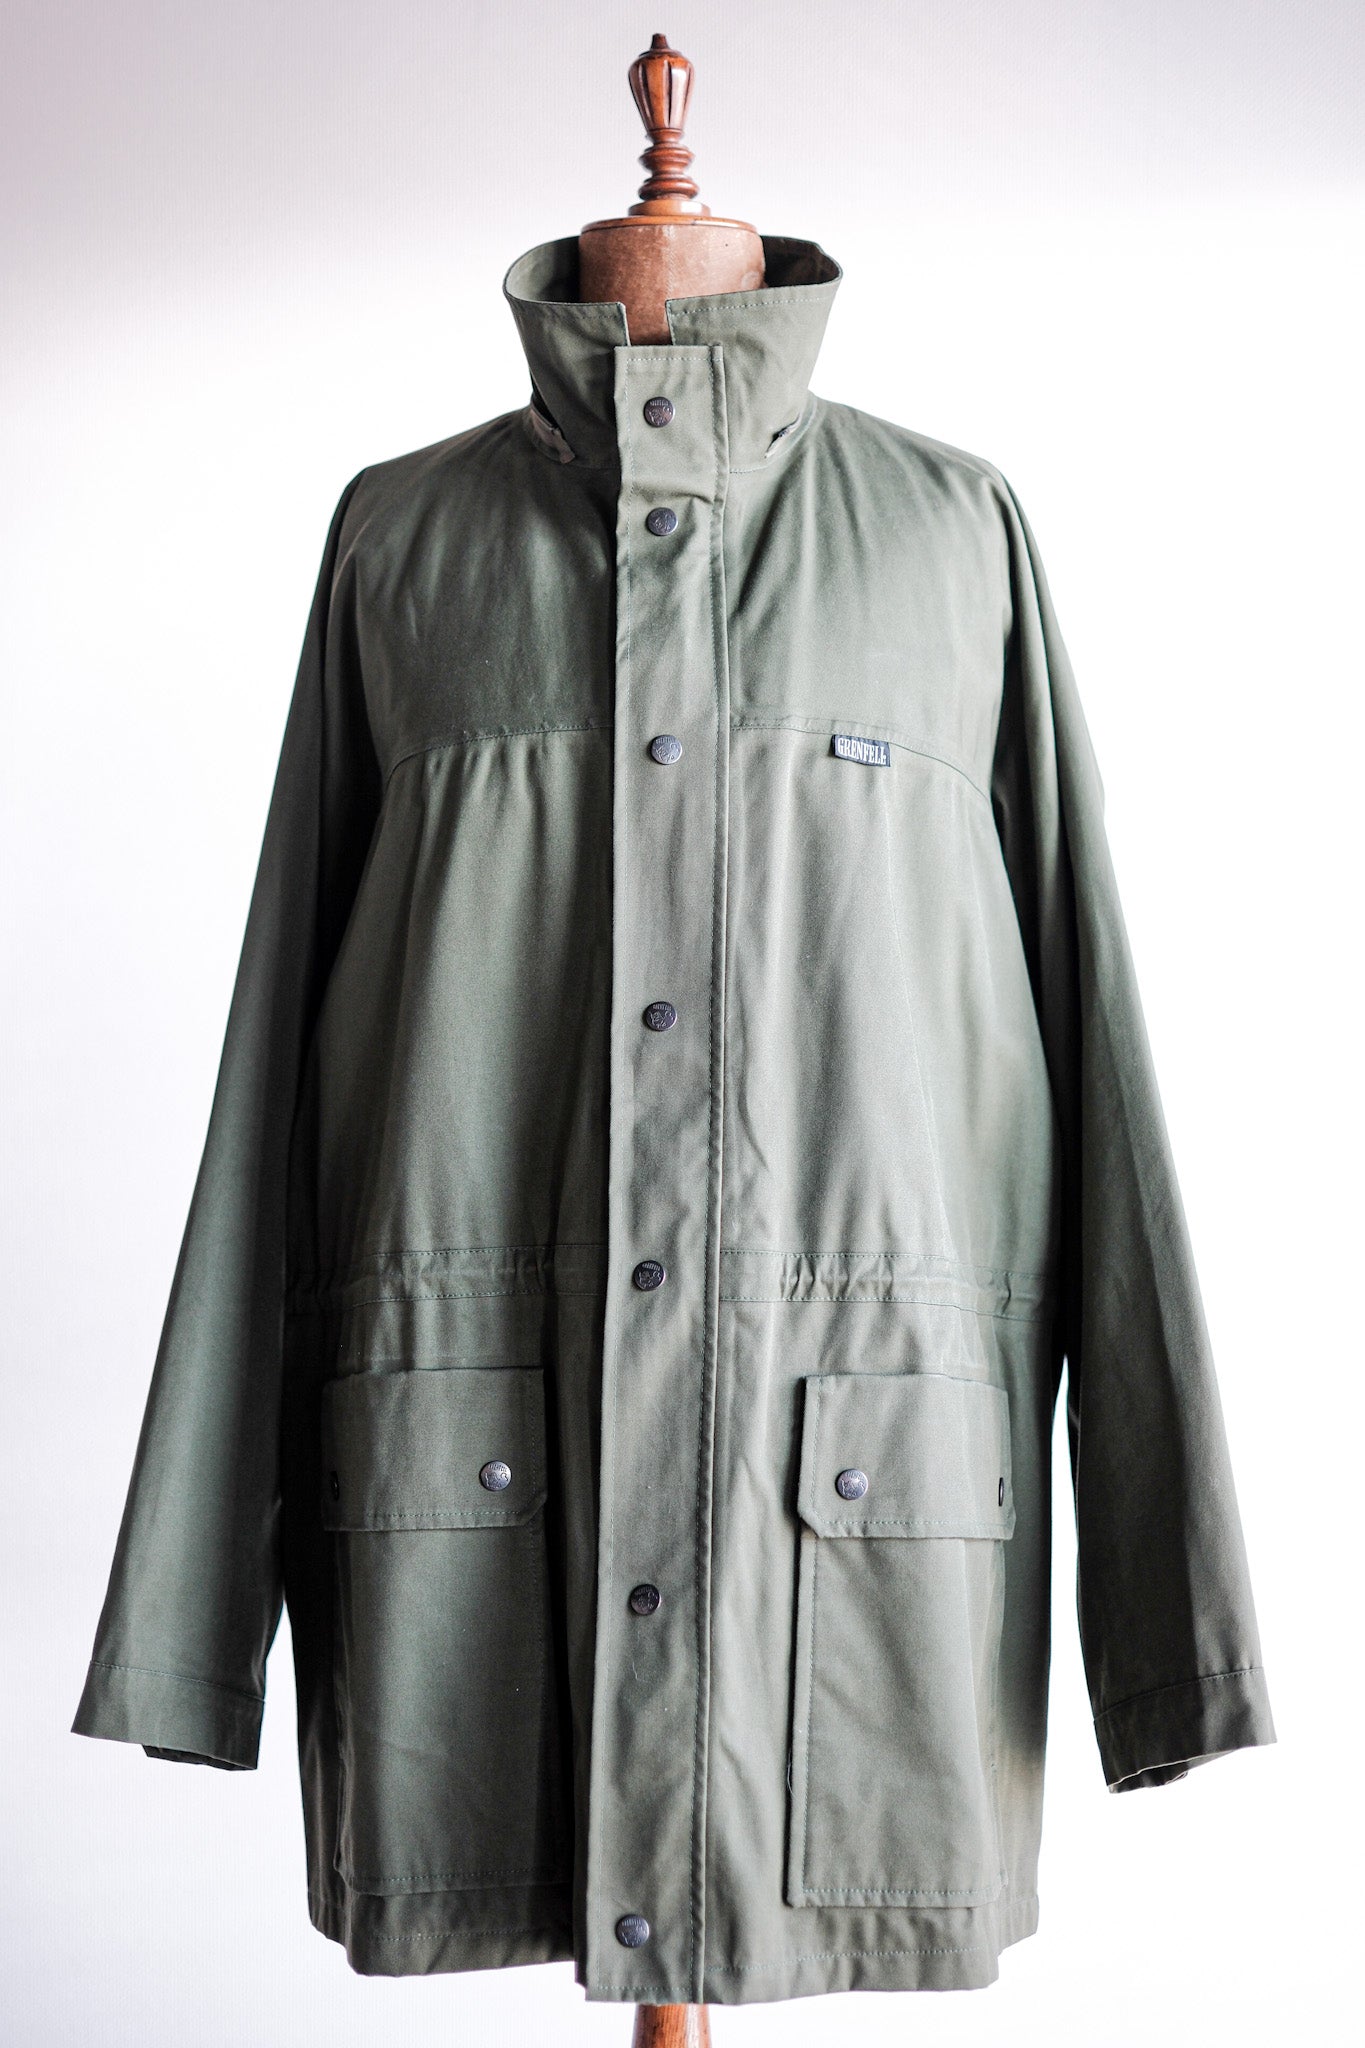 [~ 80's] แจ็คเก็ต Munro Vintage Grenfell Size.xl "Mountain Tag"